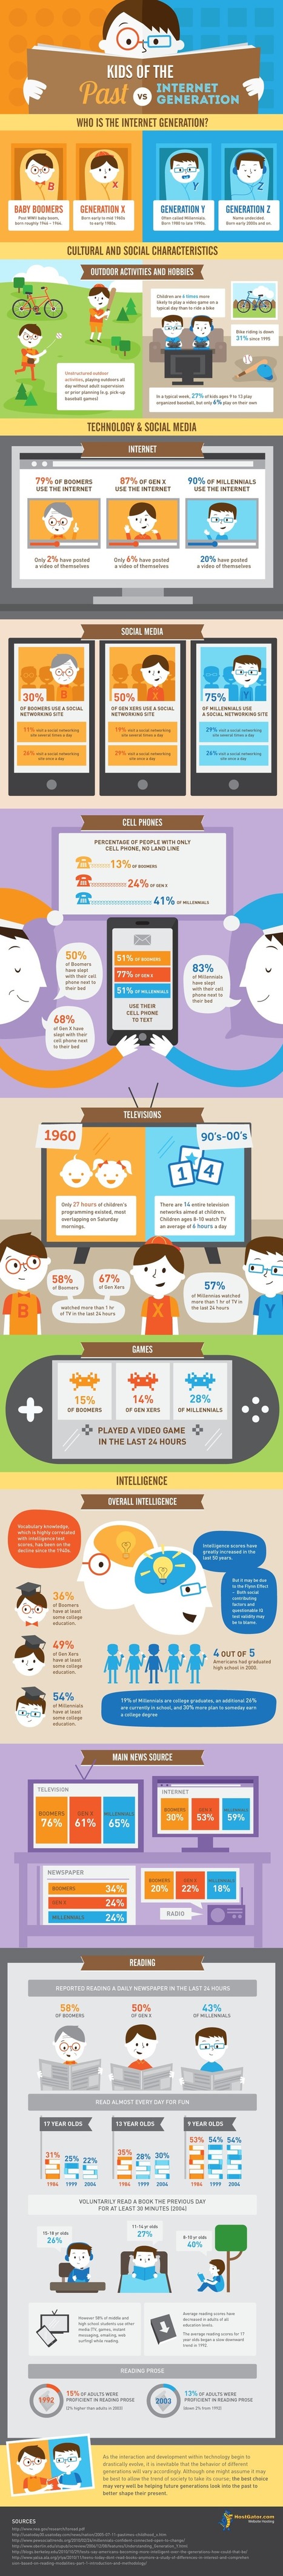 How 3 Different Generations Use The Internet (Infographic) | Digital Delights - Digital Tribes | Scoop.it